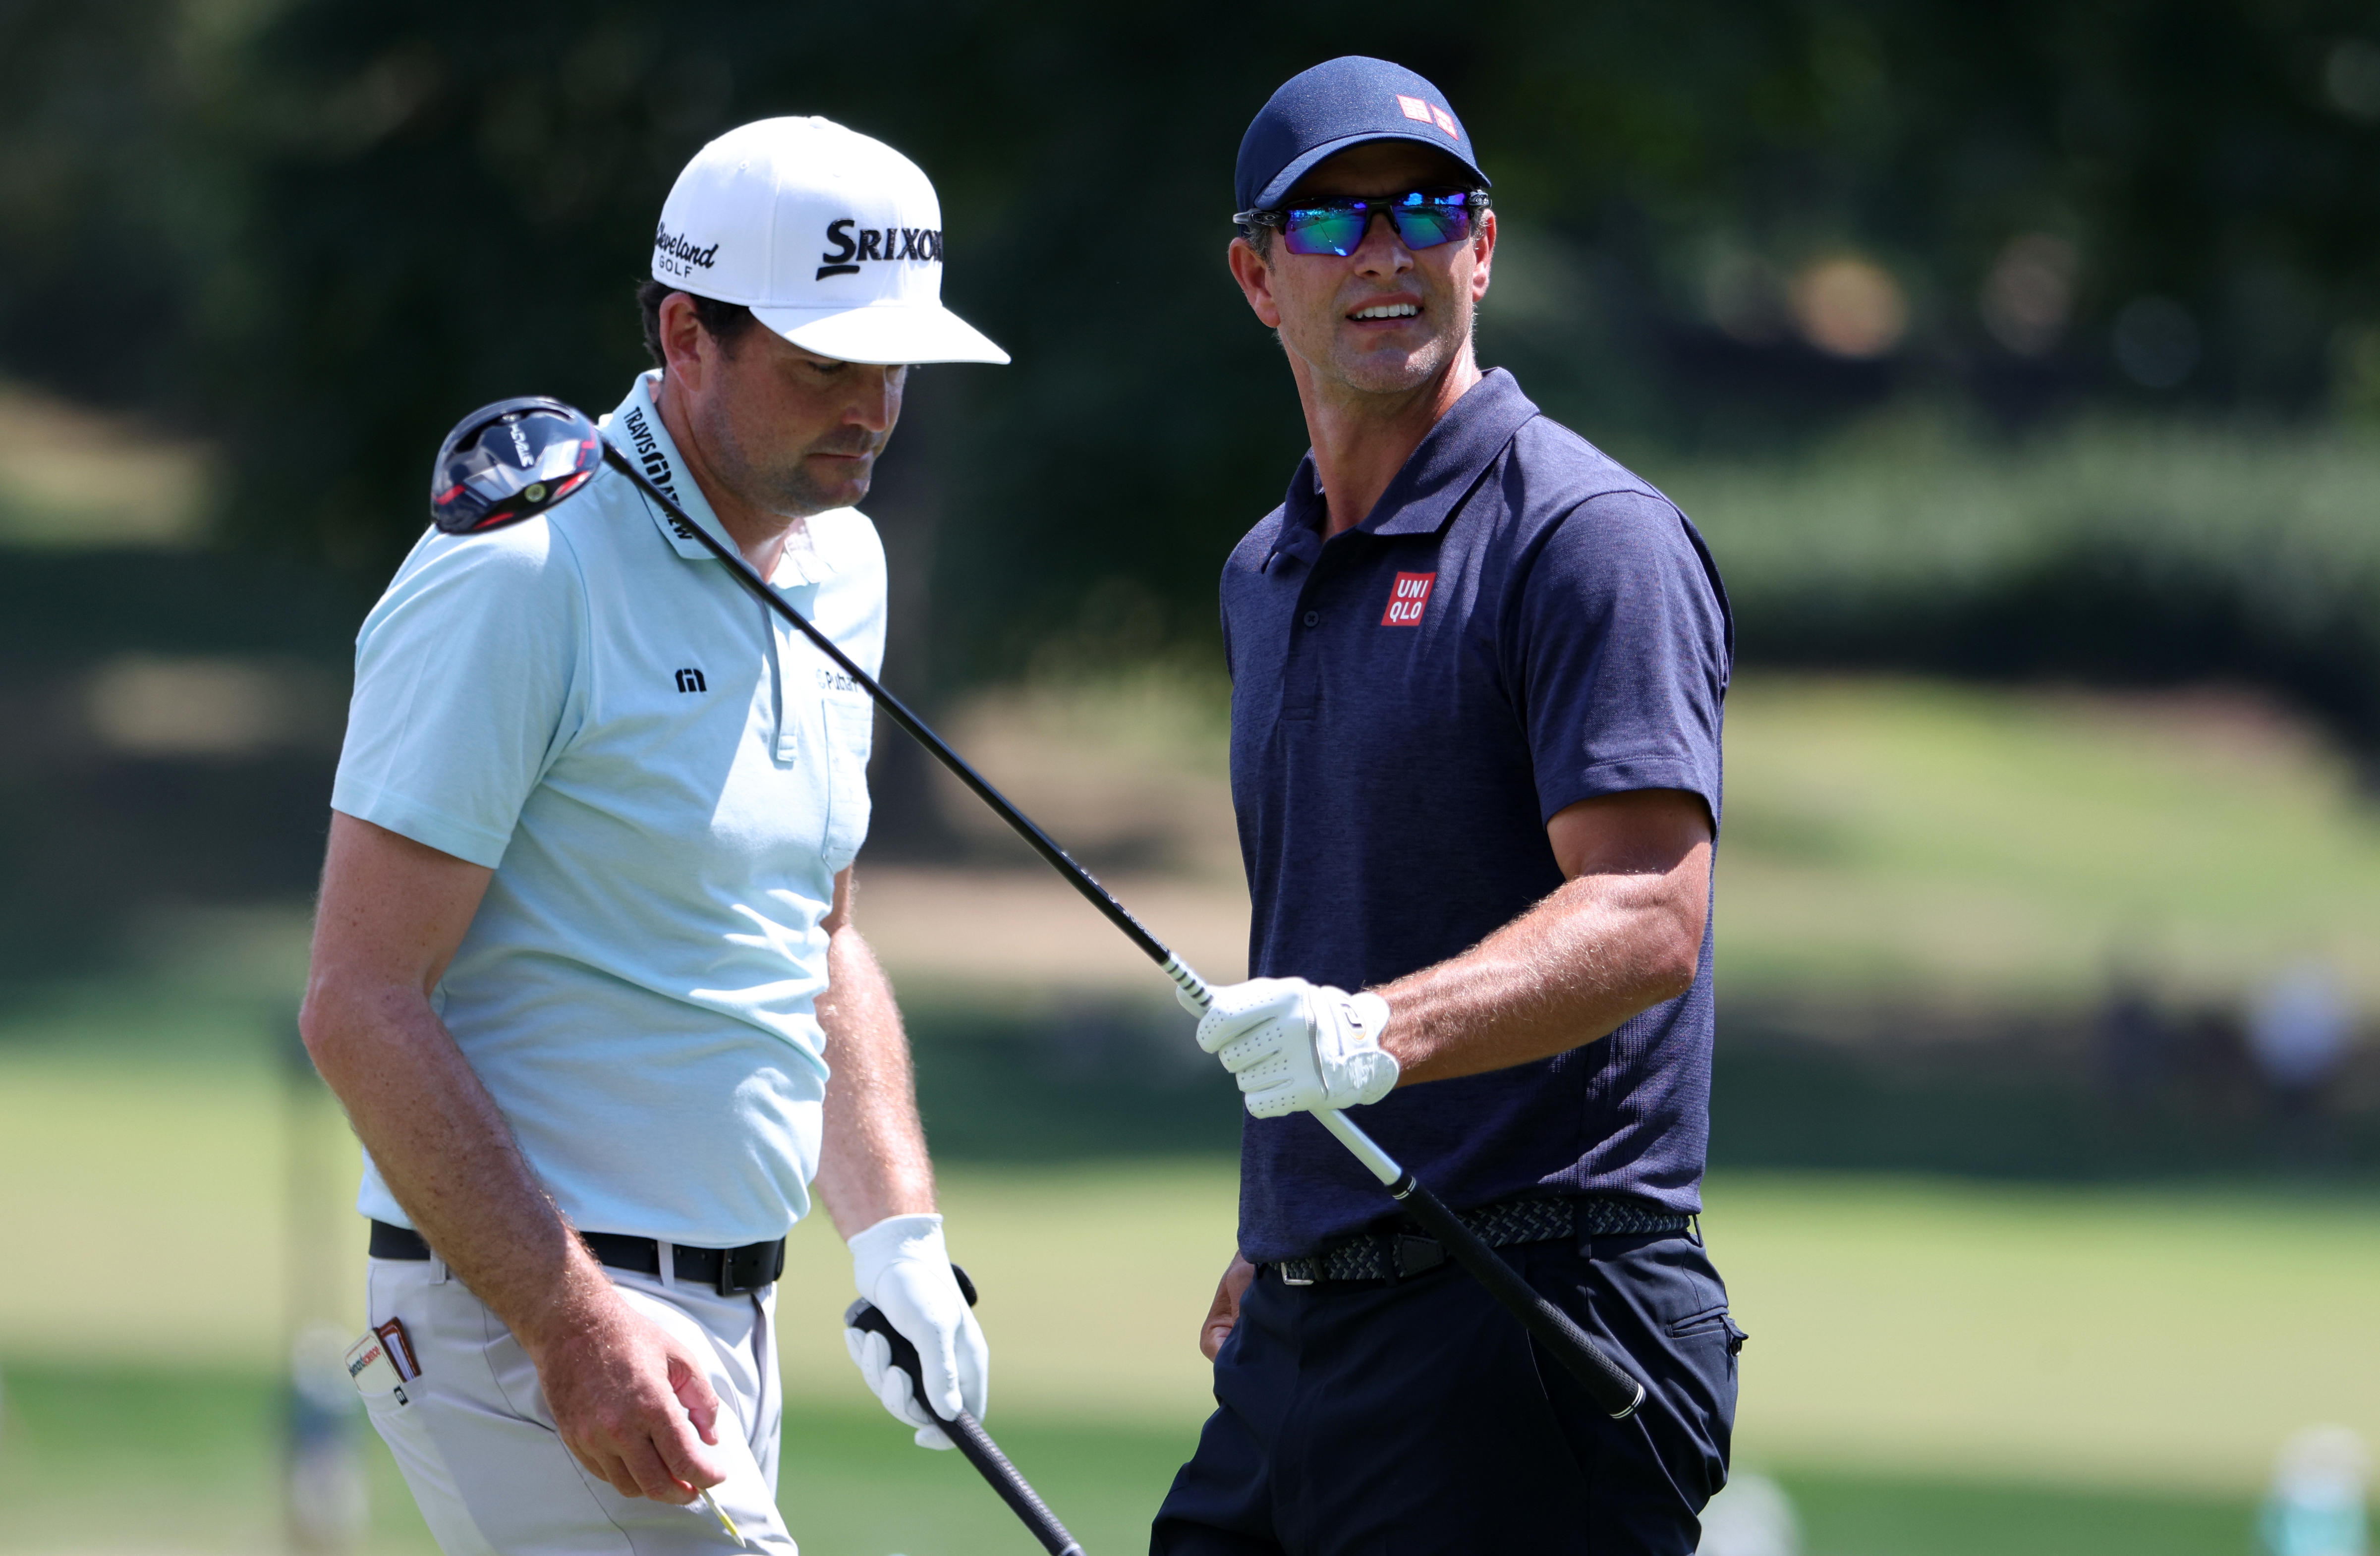 Adam Scott of Australia and Keegan Bradley of the United States walk from the third tee during the second round of the BMW Championship at Wilmington Country Club on August 19, 2022 in Wilmington, Delaware. (Photo by Rob Carr/Getty Images)